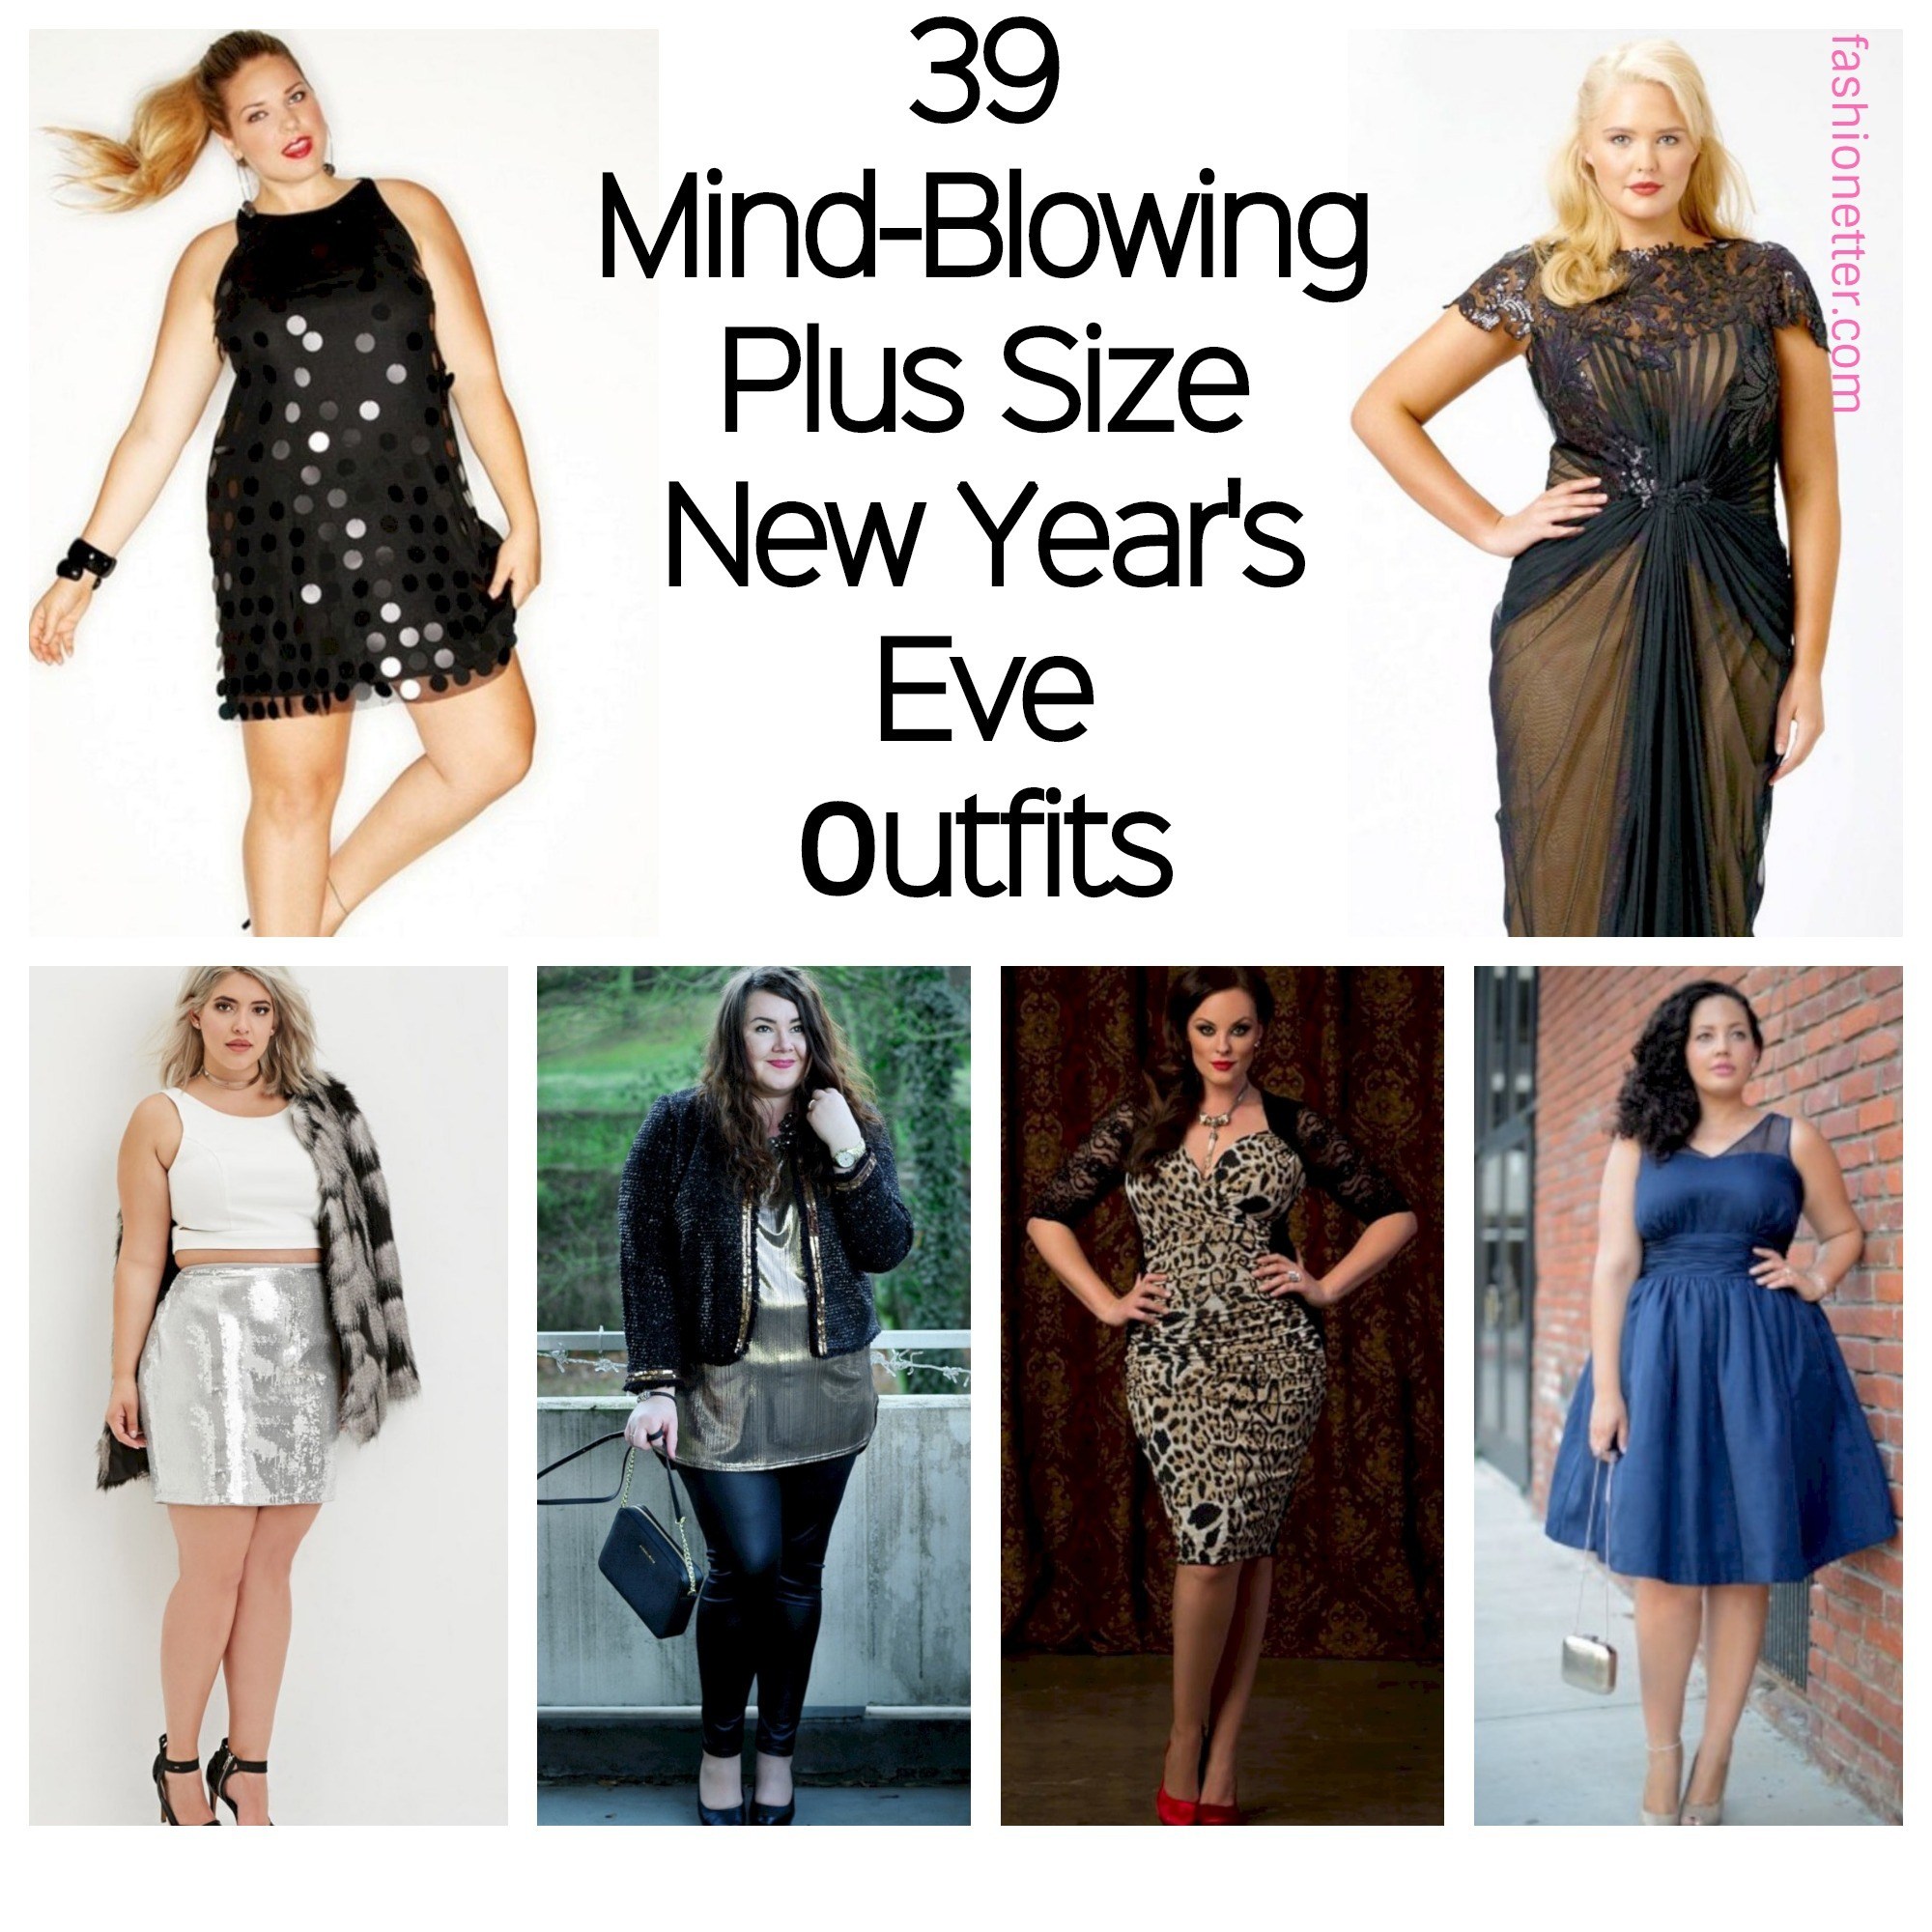 39 Mind-Blowing Plus Size New Year's Eve Outfits - Fashionetter